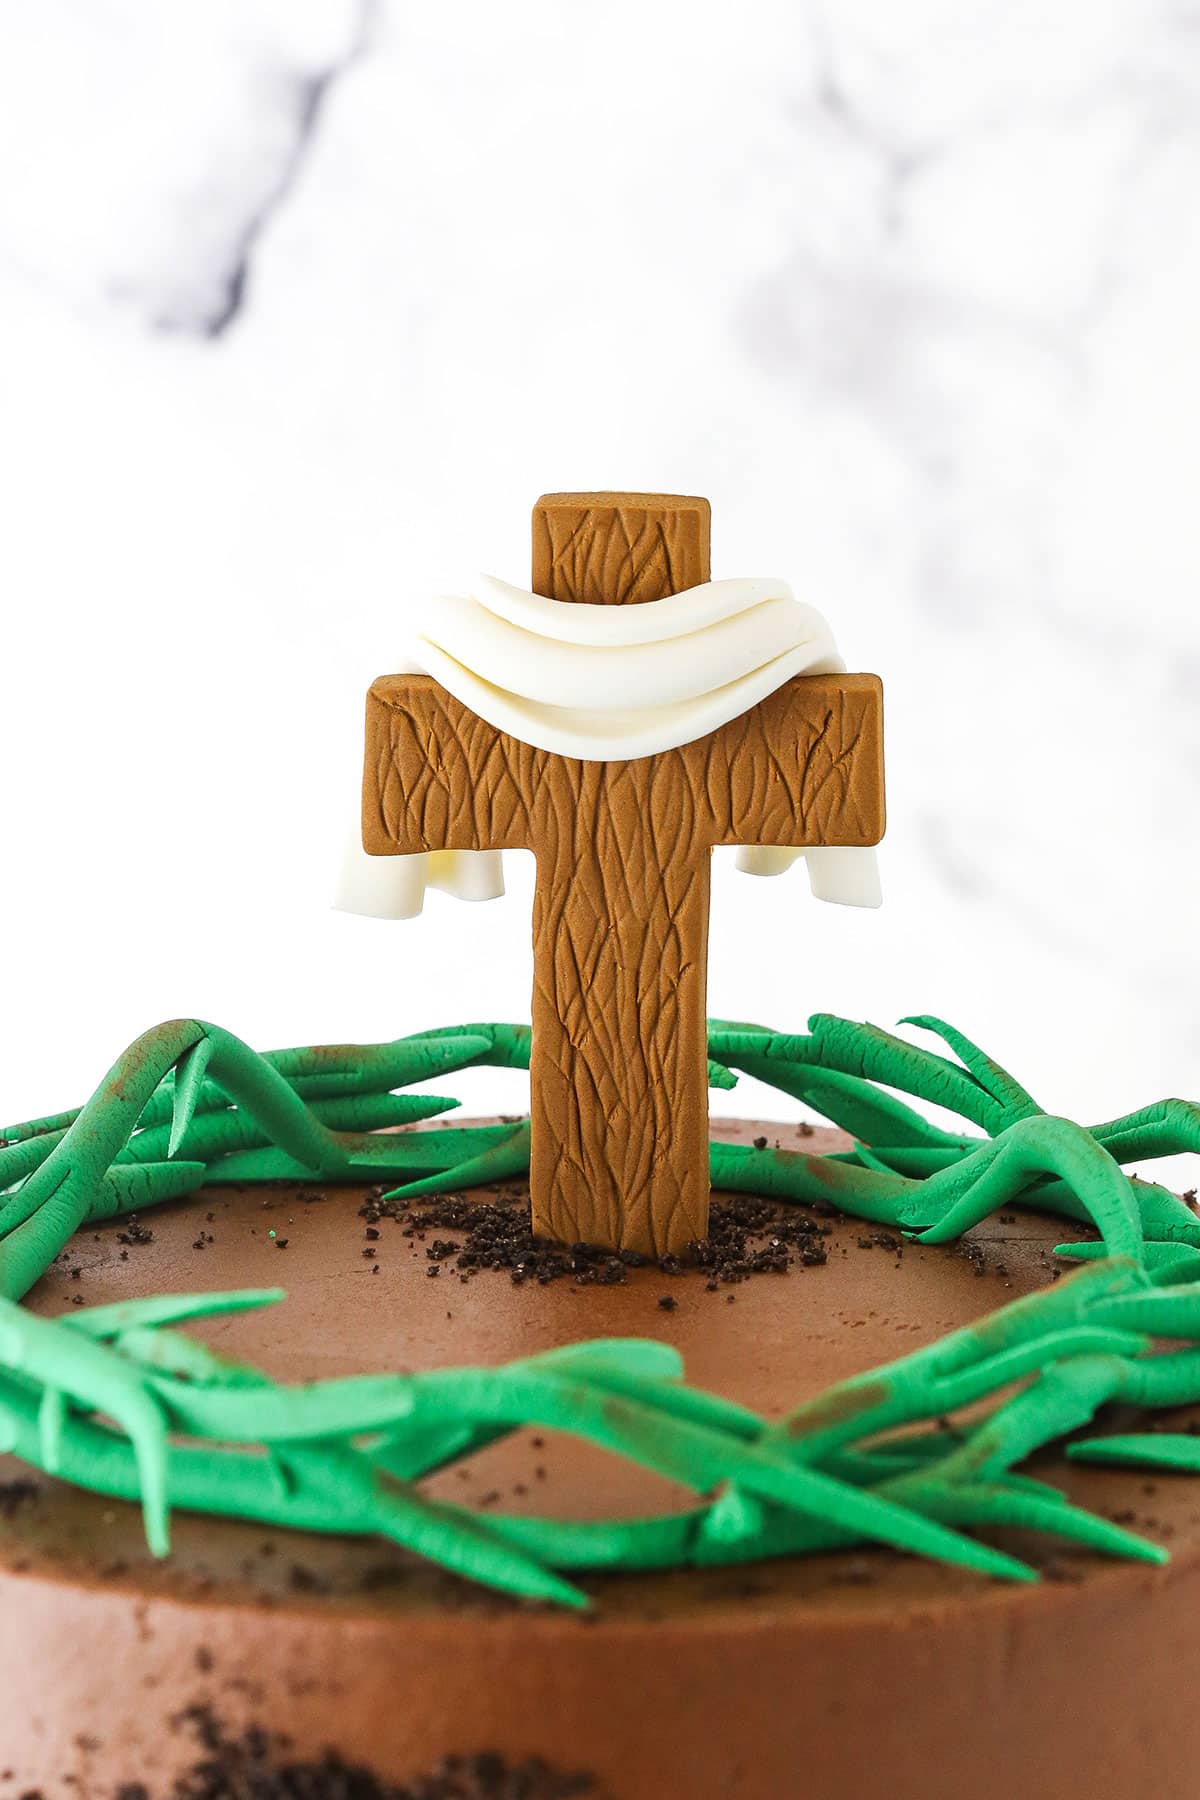 A closeup view of the decorated top of a Resurrection Cake with a cross and crown of thorns